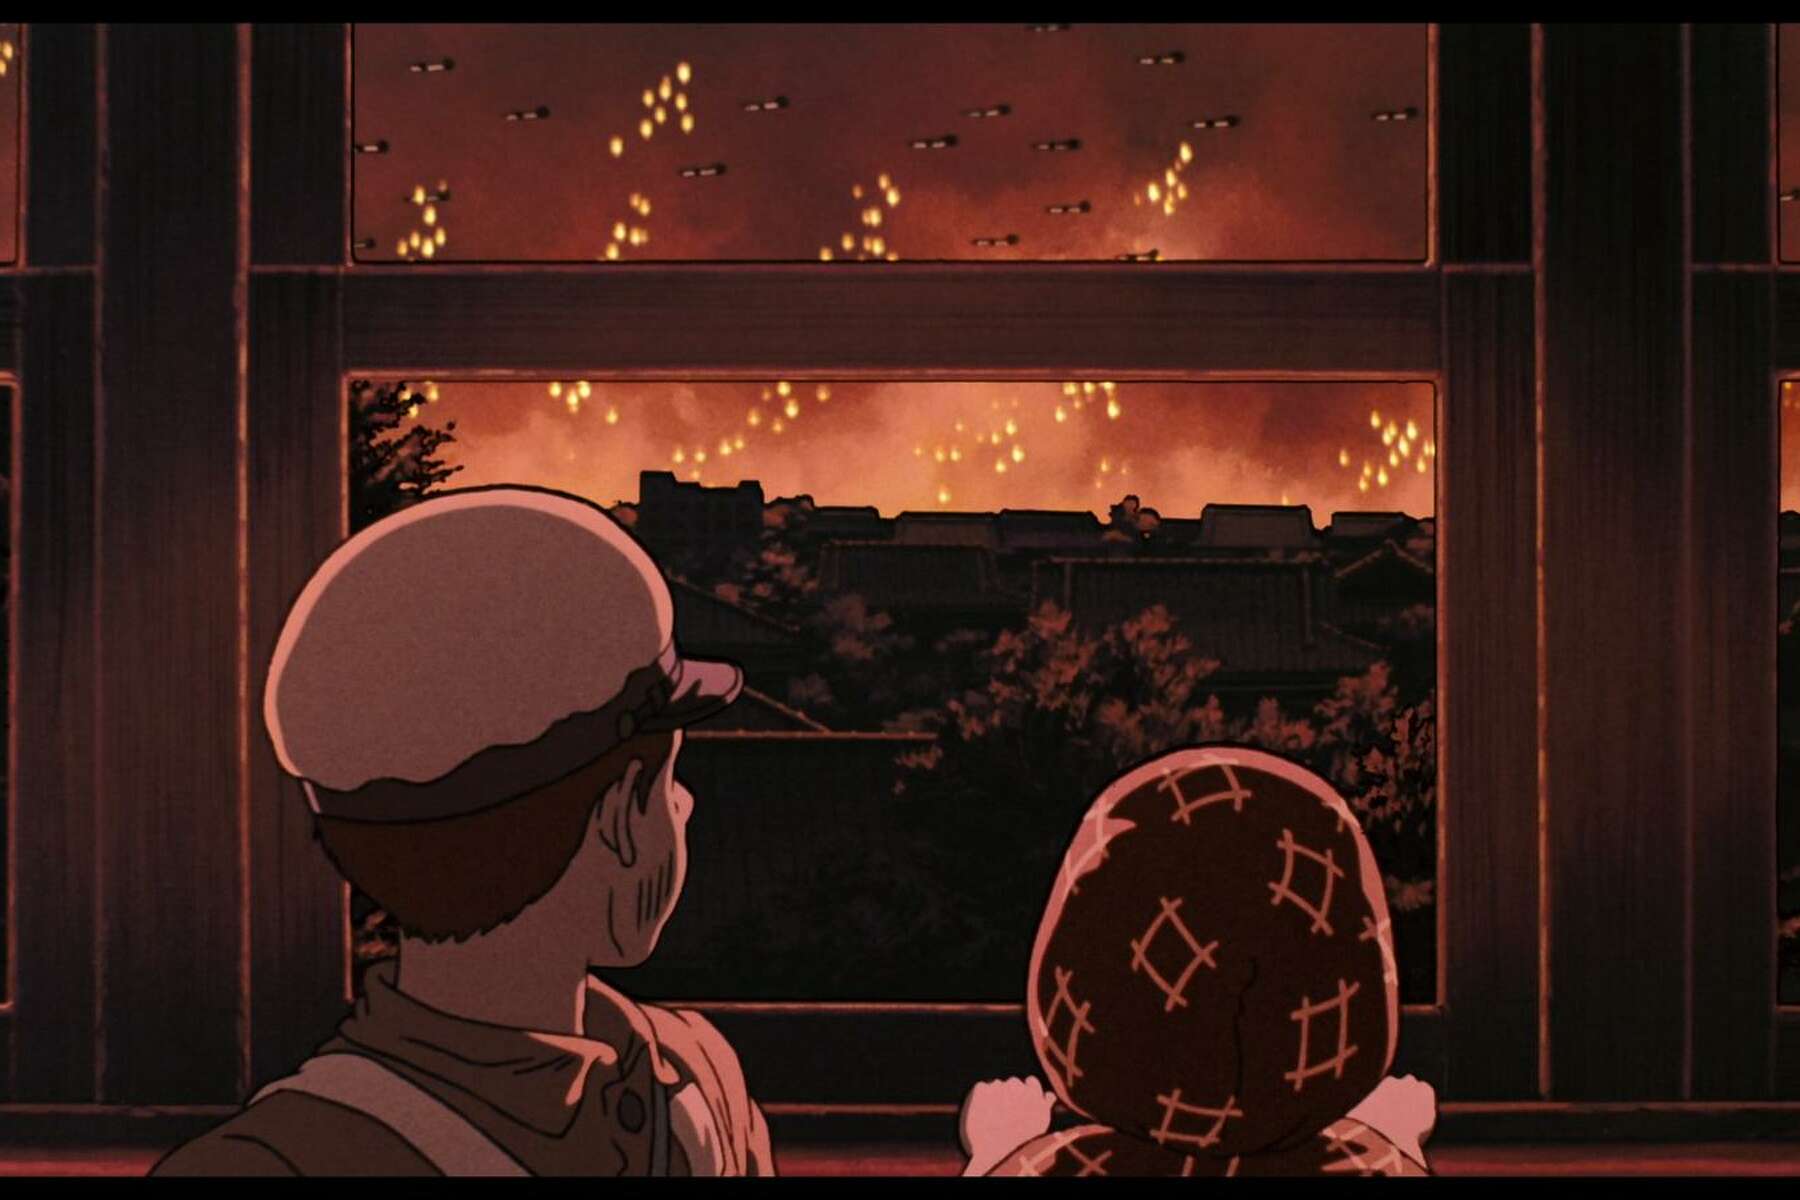 Film: Grave of the Fireflies – Morikami Museum and Japanese Gardens